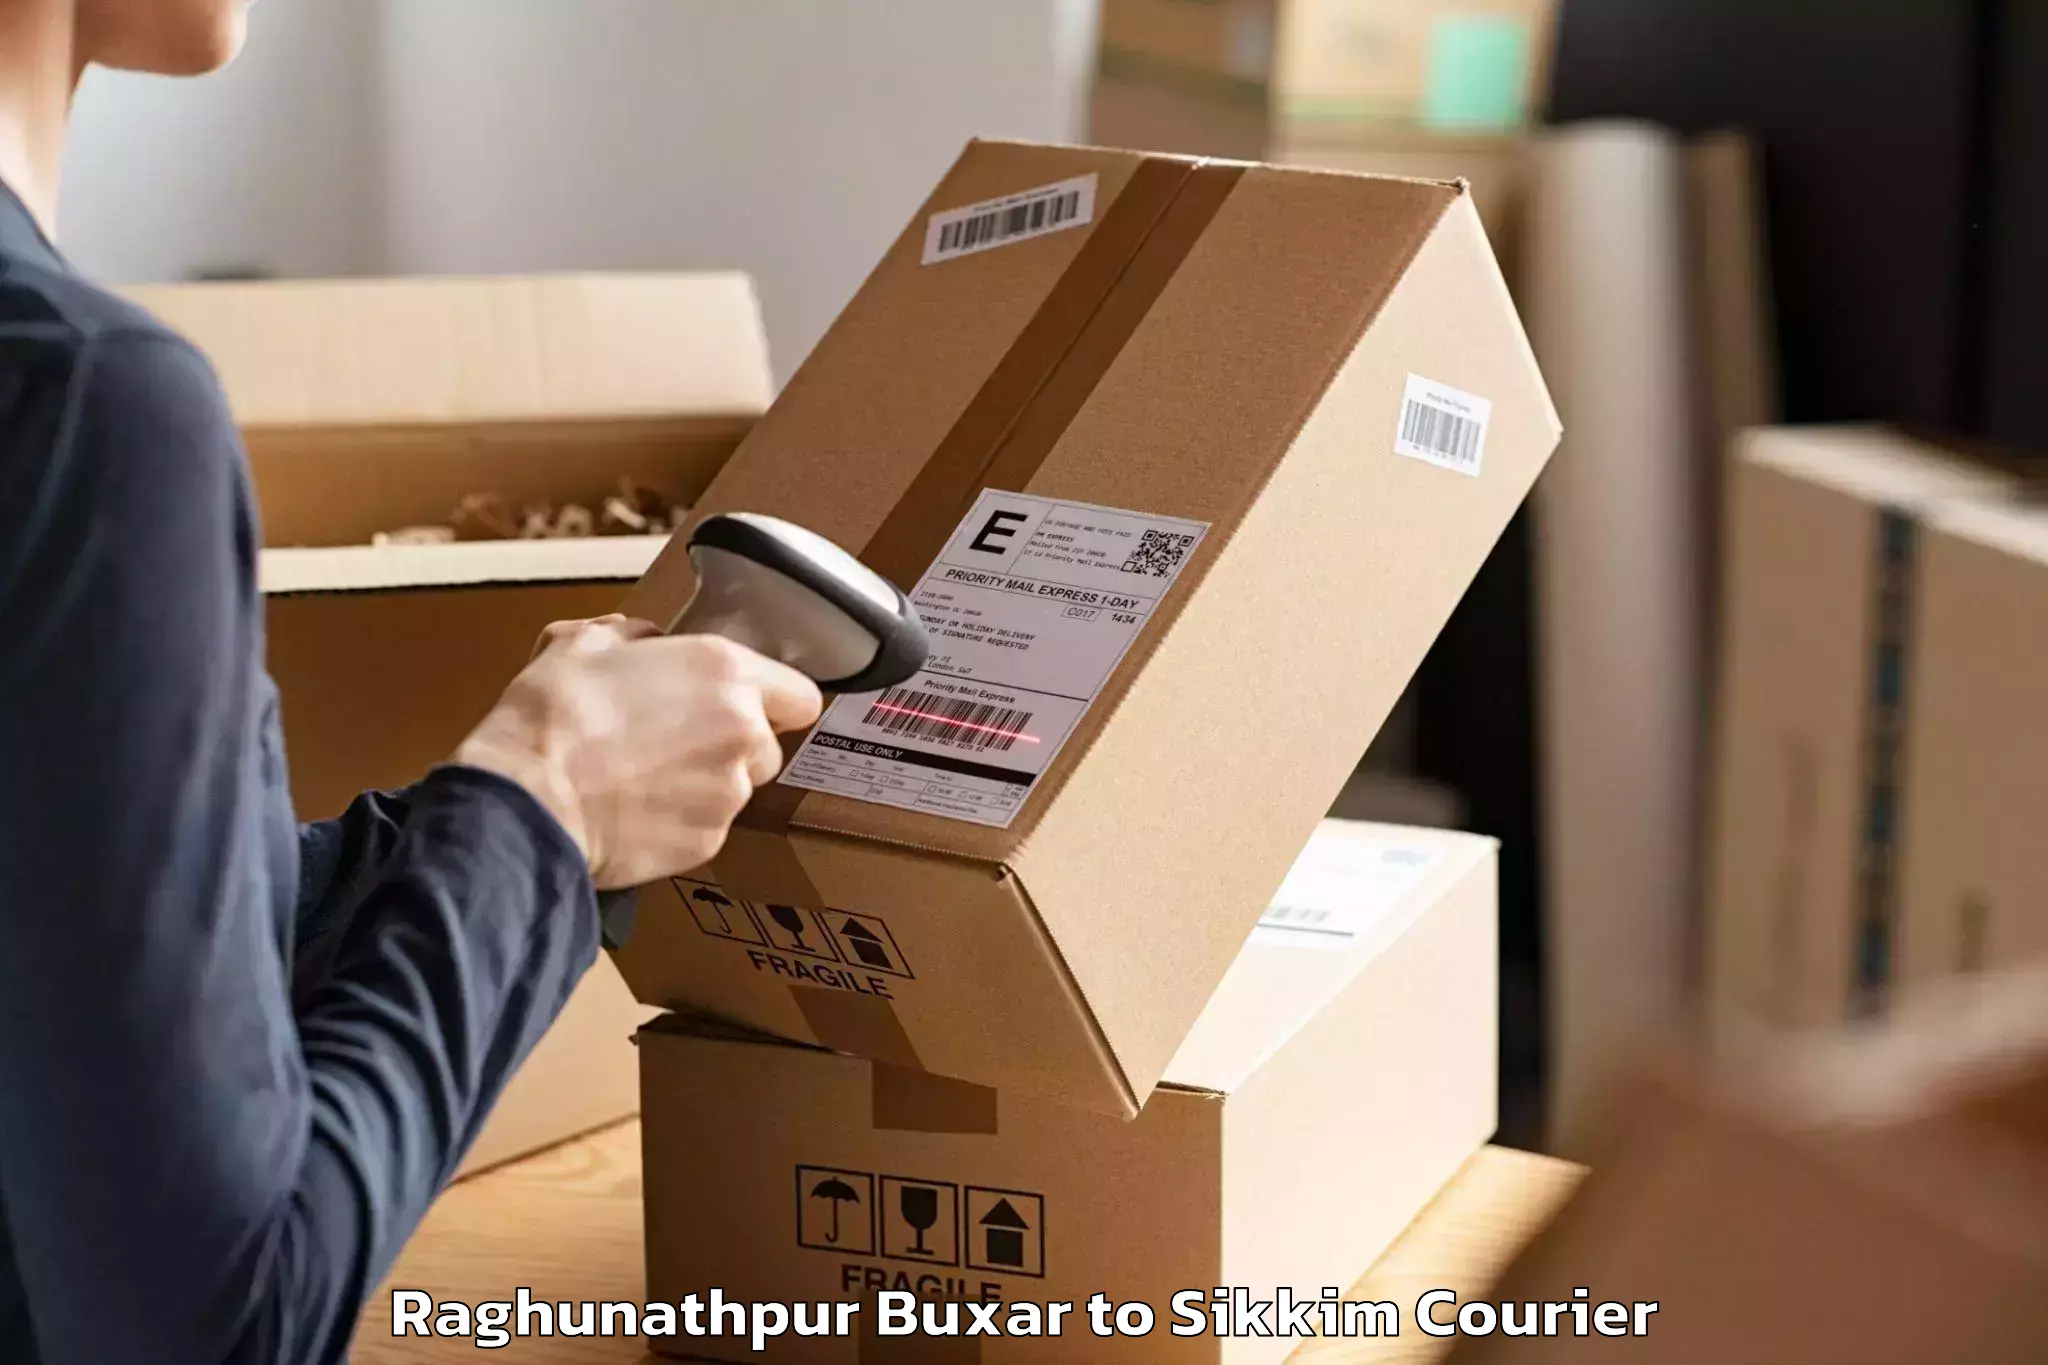 Moving and packing experts Raghunathpur Buxar to NIT Sikkim